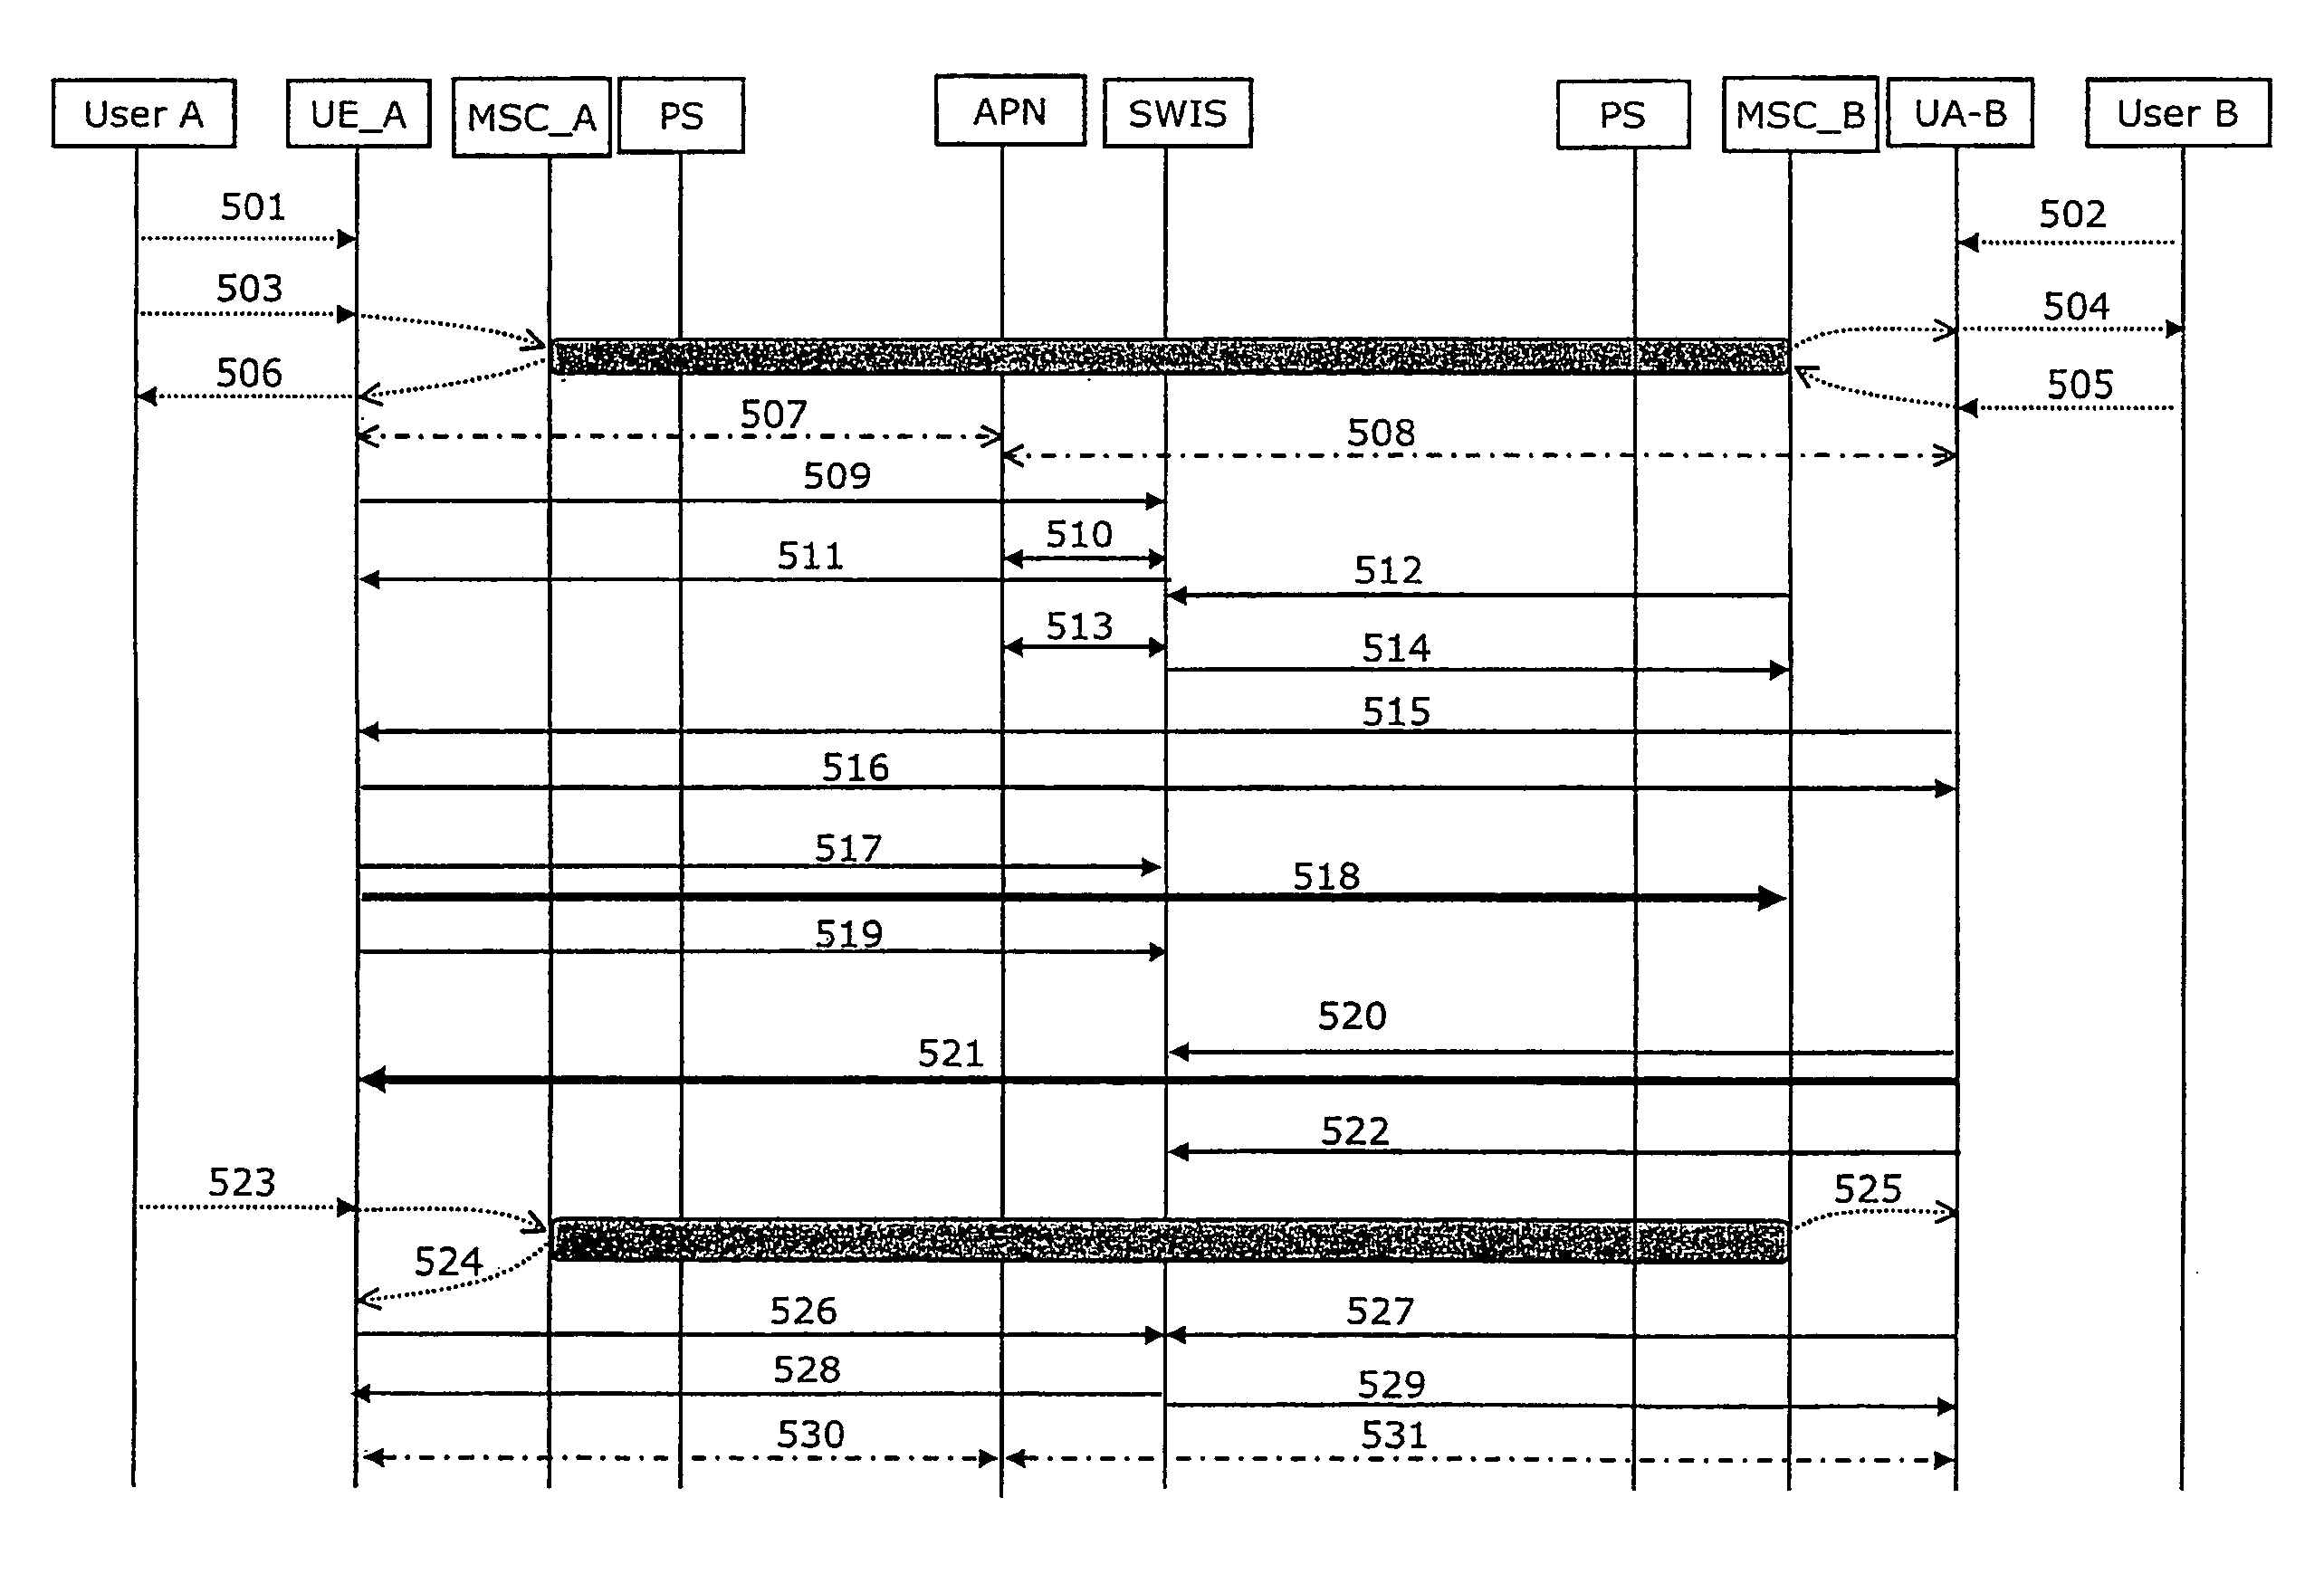 Enabling combinational services in a communications network